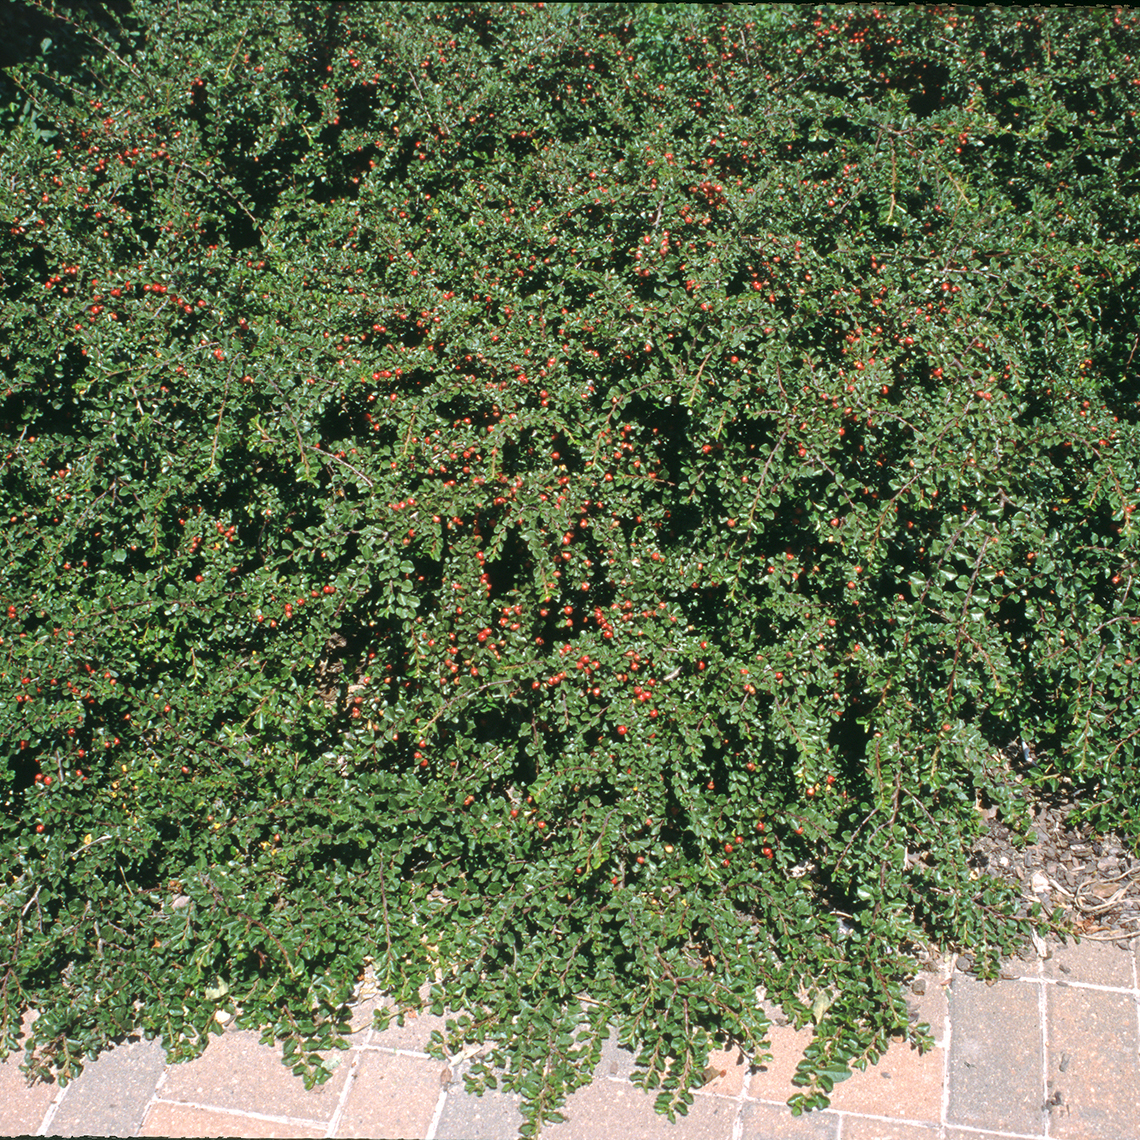 Cotoneaster apiculatus with glossy green foliage and dots of red berries draping over brick pavers